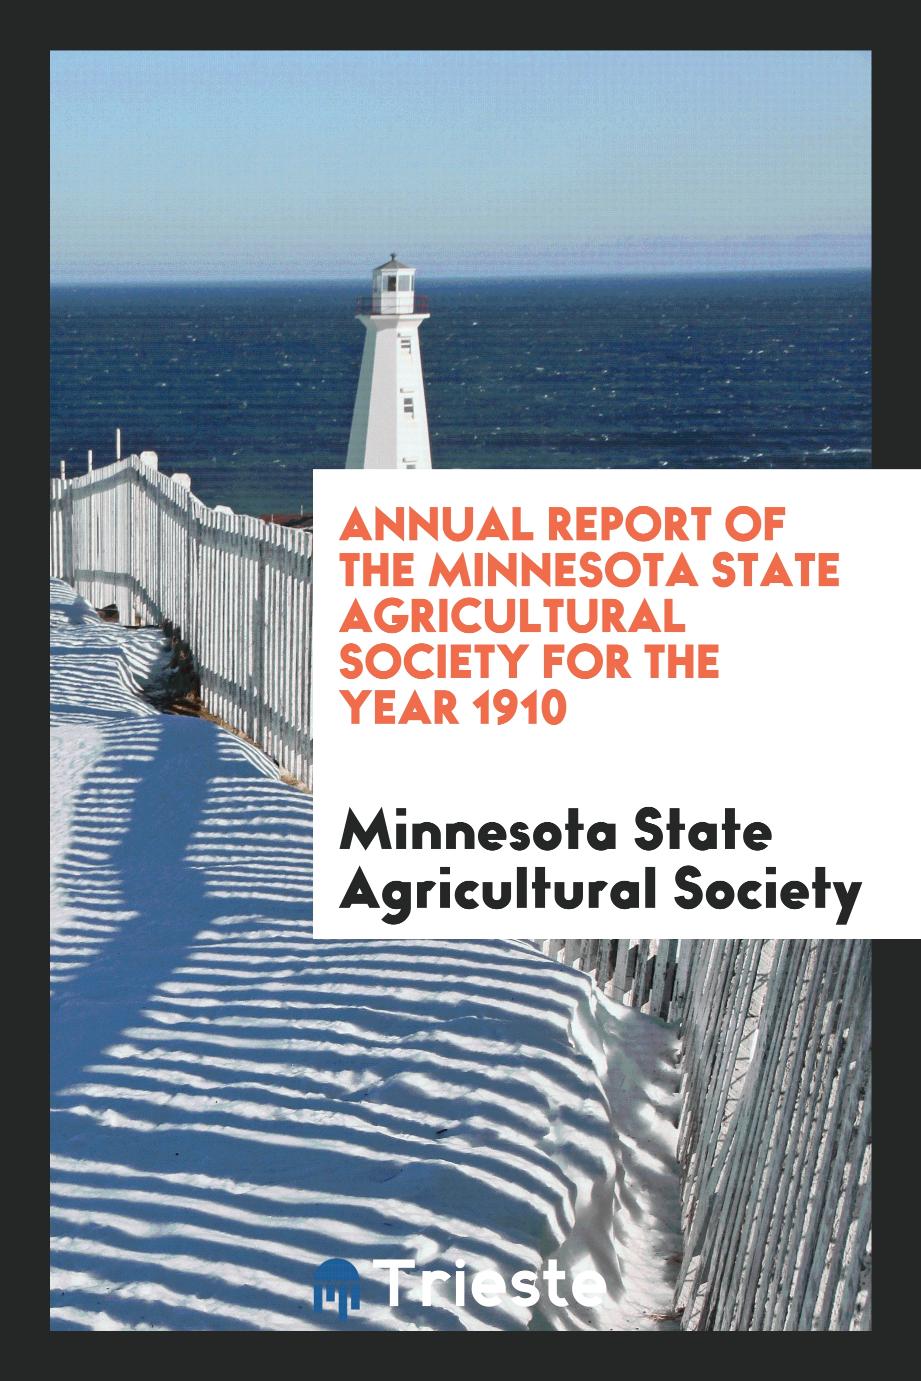 Annual Report of the Minnesota State Agricultural Society for the Year 1910